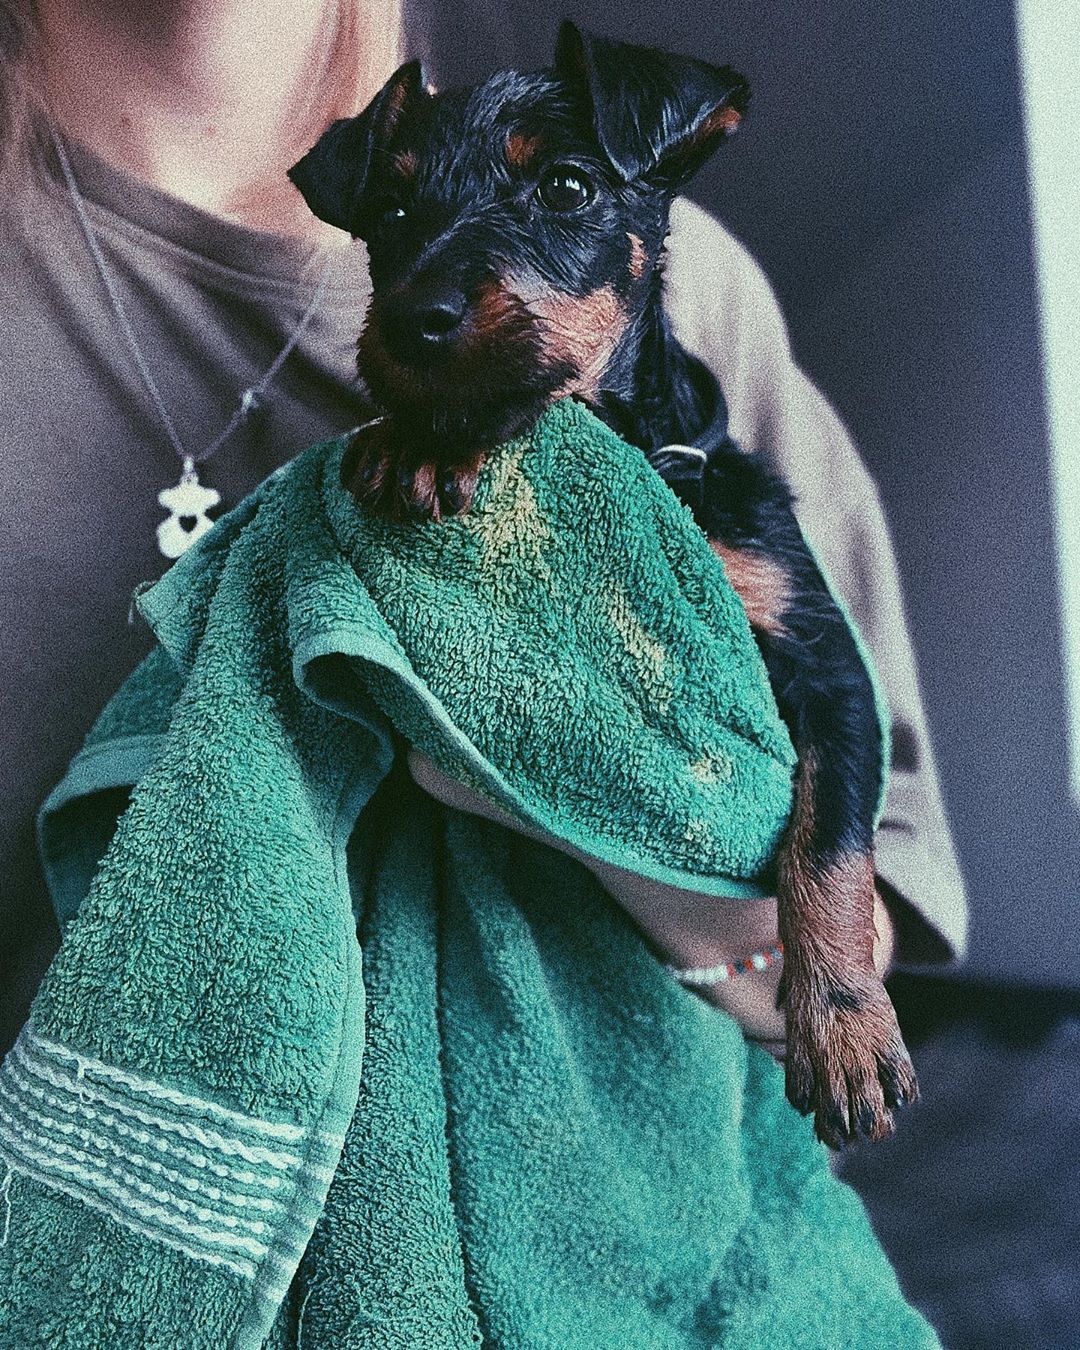 A washed Jagdterrier puppy in a towel while being carried by a woman